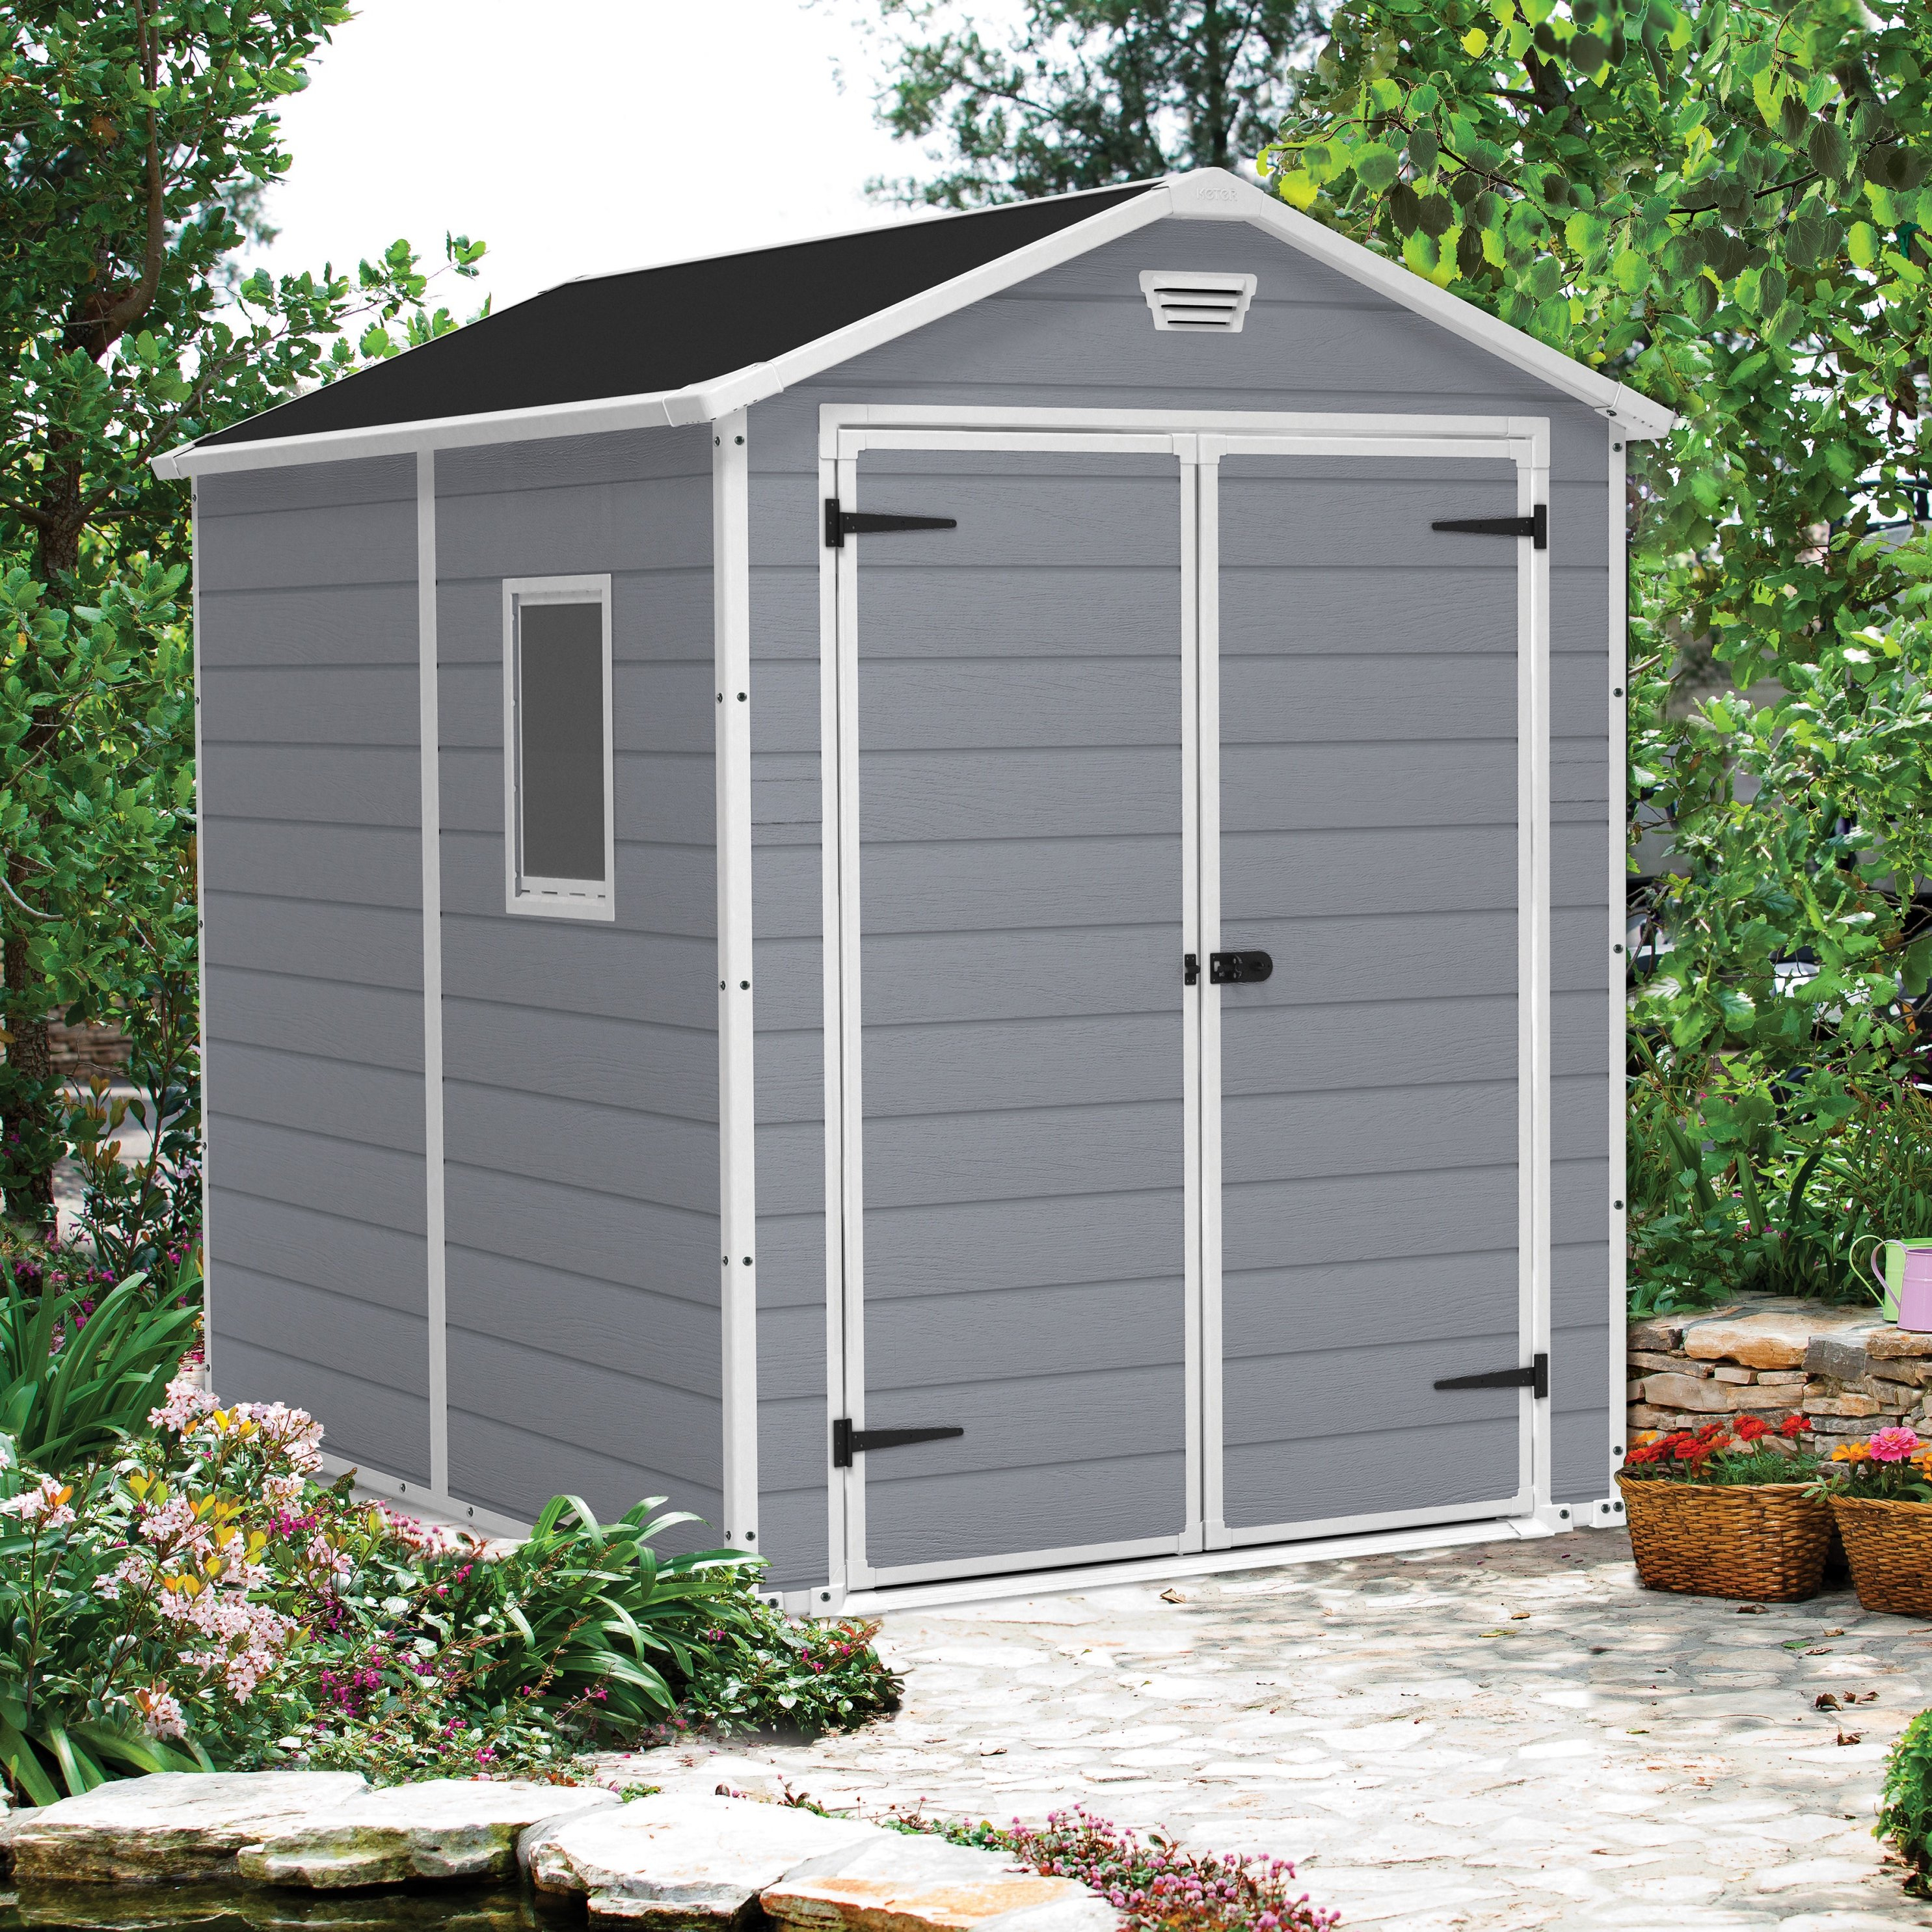 Keter Manor 6 Ft W X 74 Ft Plastic Storage Shed Reviews Wayfair in size 2970 X 2970